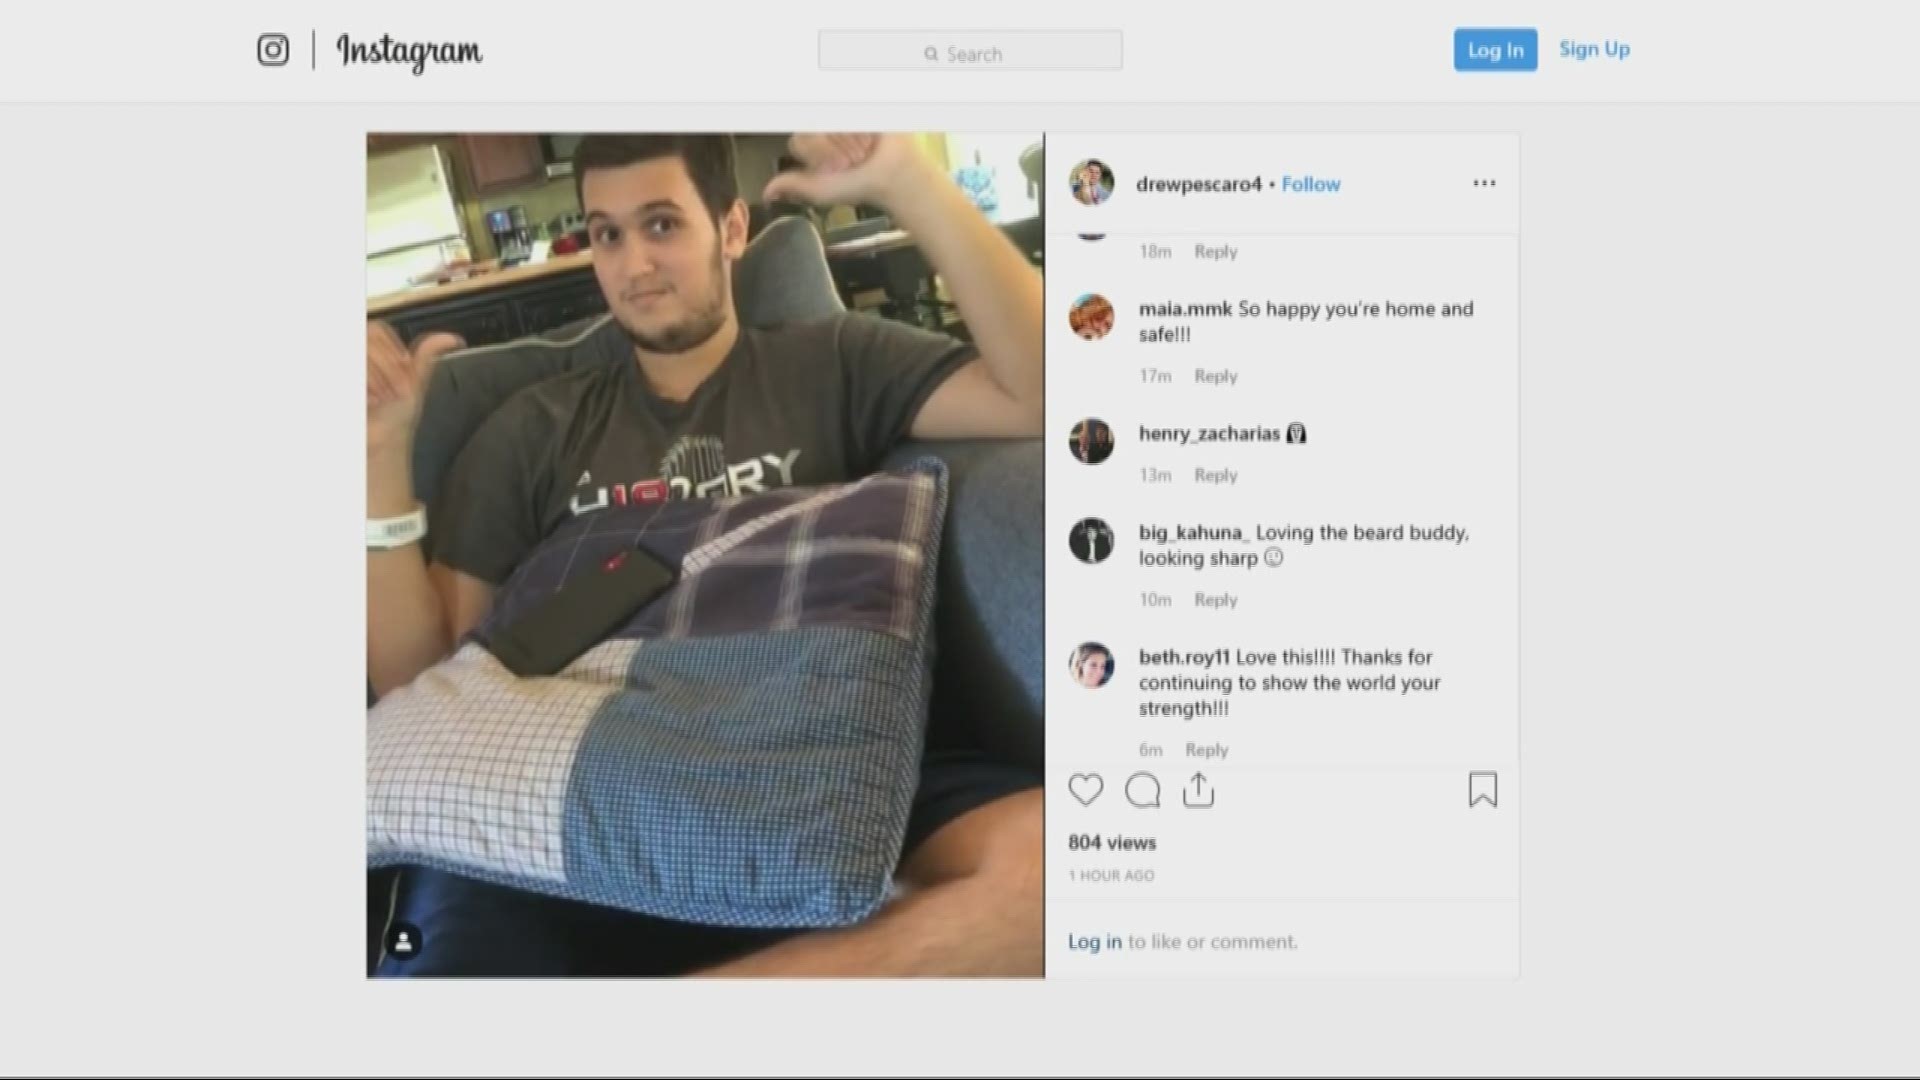 Pescaro posted a video on Instagram and Twitter announcing that he had returned home after being discharged. He was one of the four UNCC students injured in the deadly campus shooting.